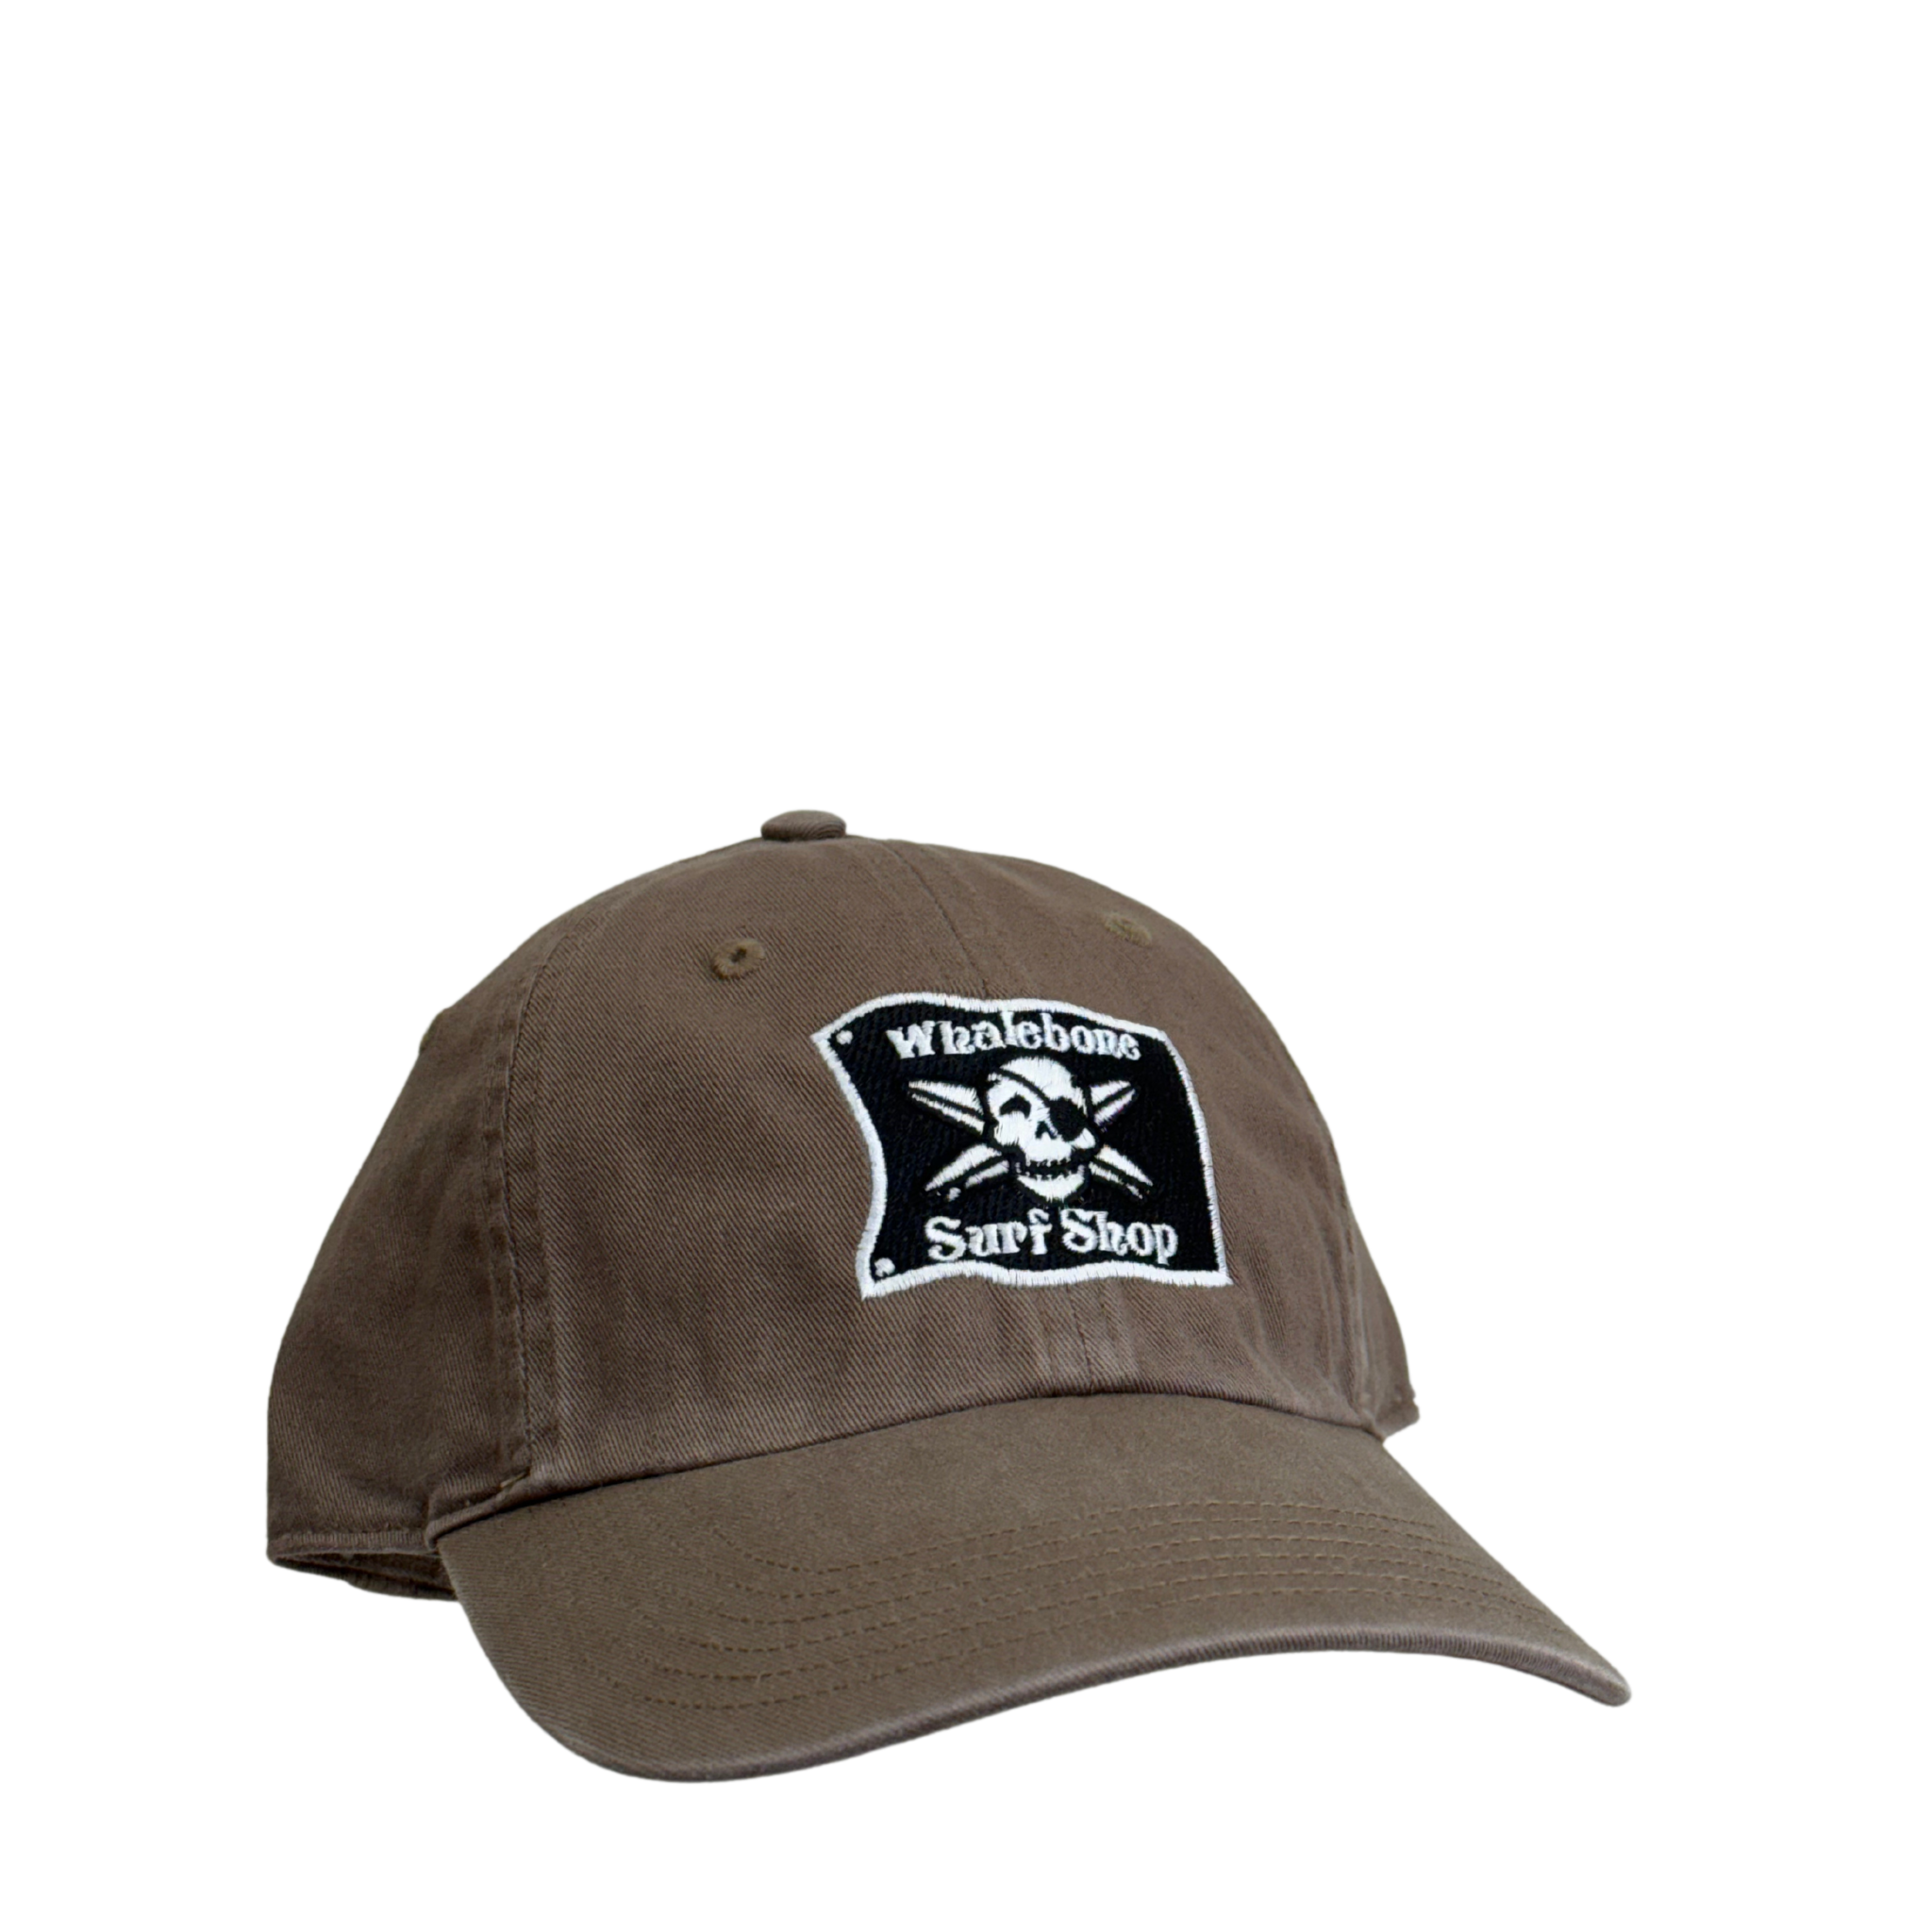 LOGO HAT 223- 320 EMBROIDERED FLAG ADJUSTABLE CHINO HAT